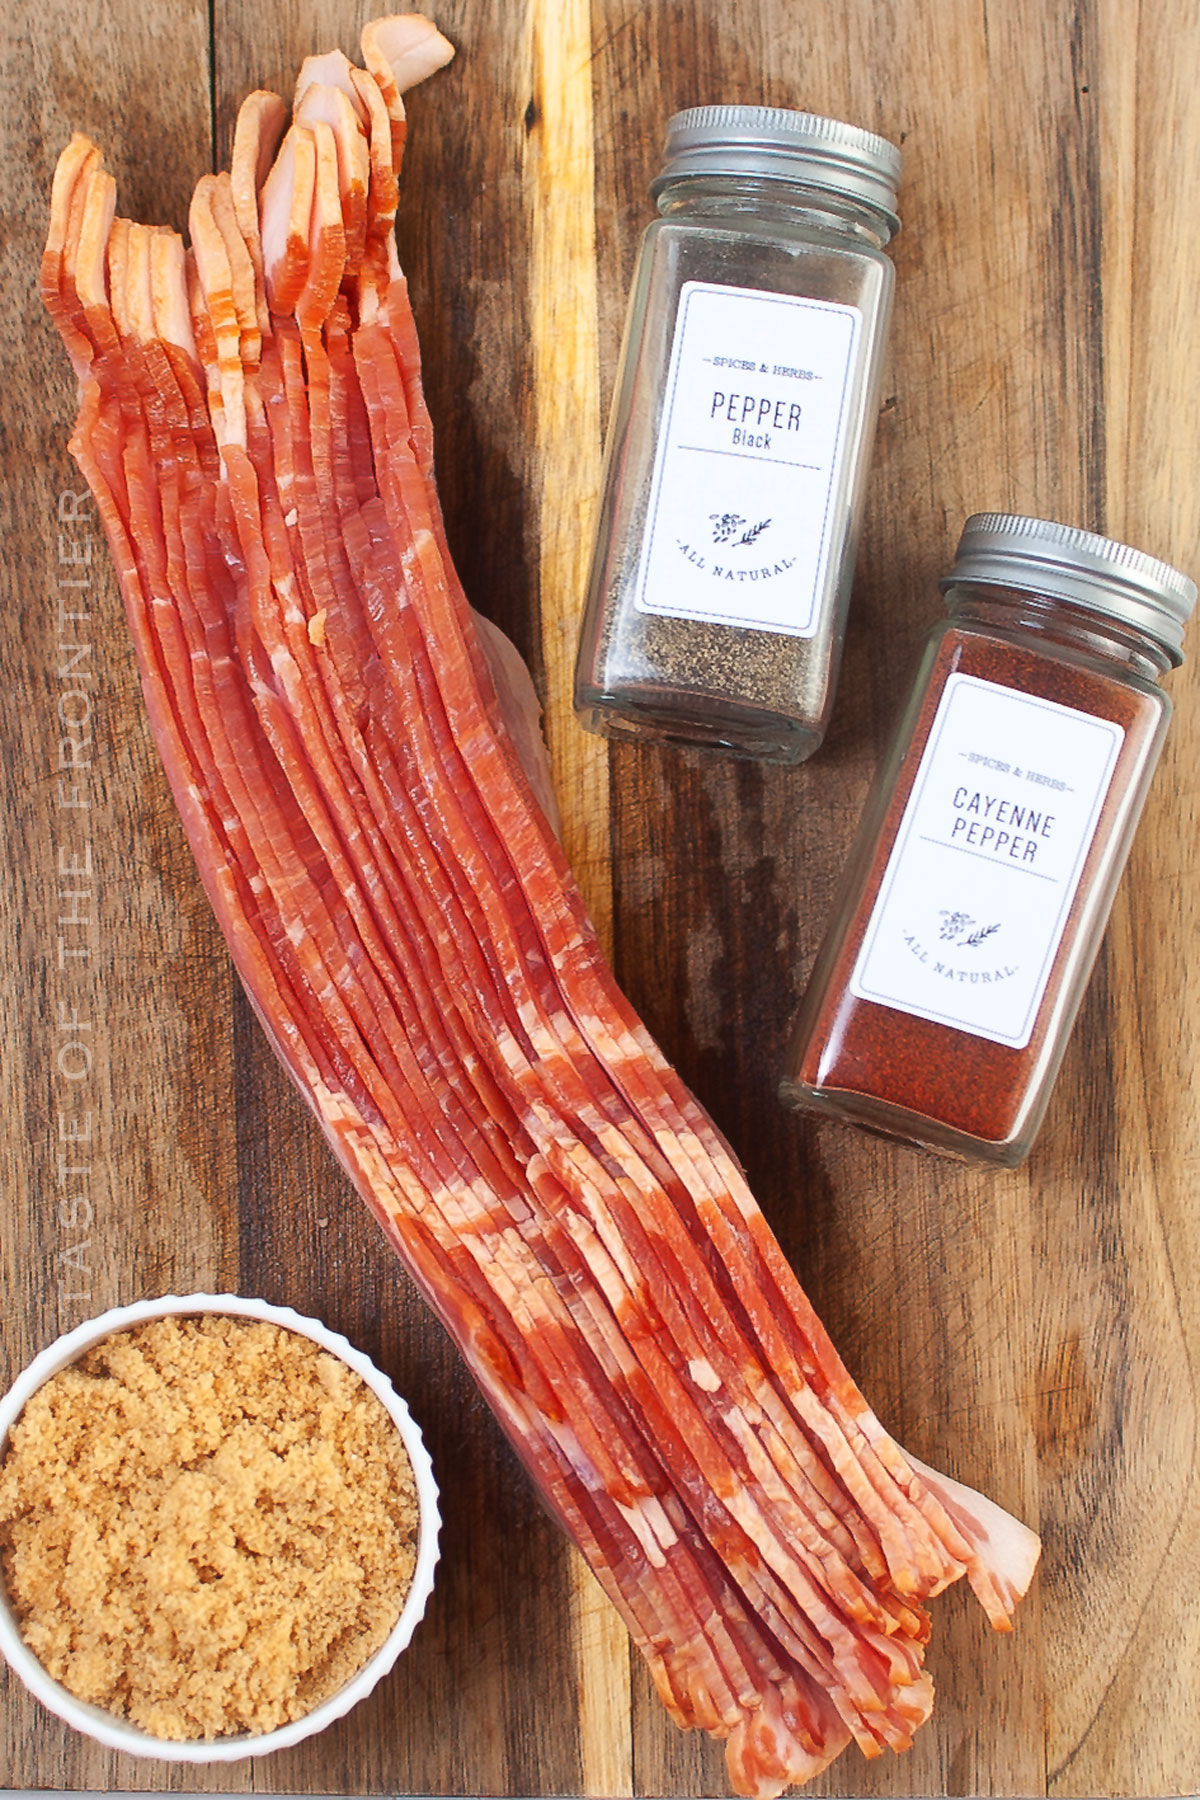 Twisted Bacon Ingredients